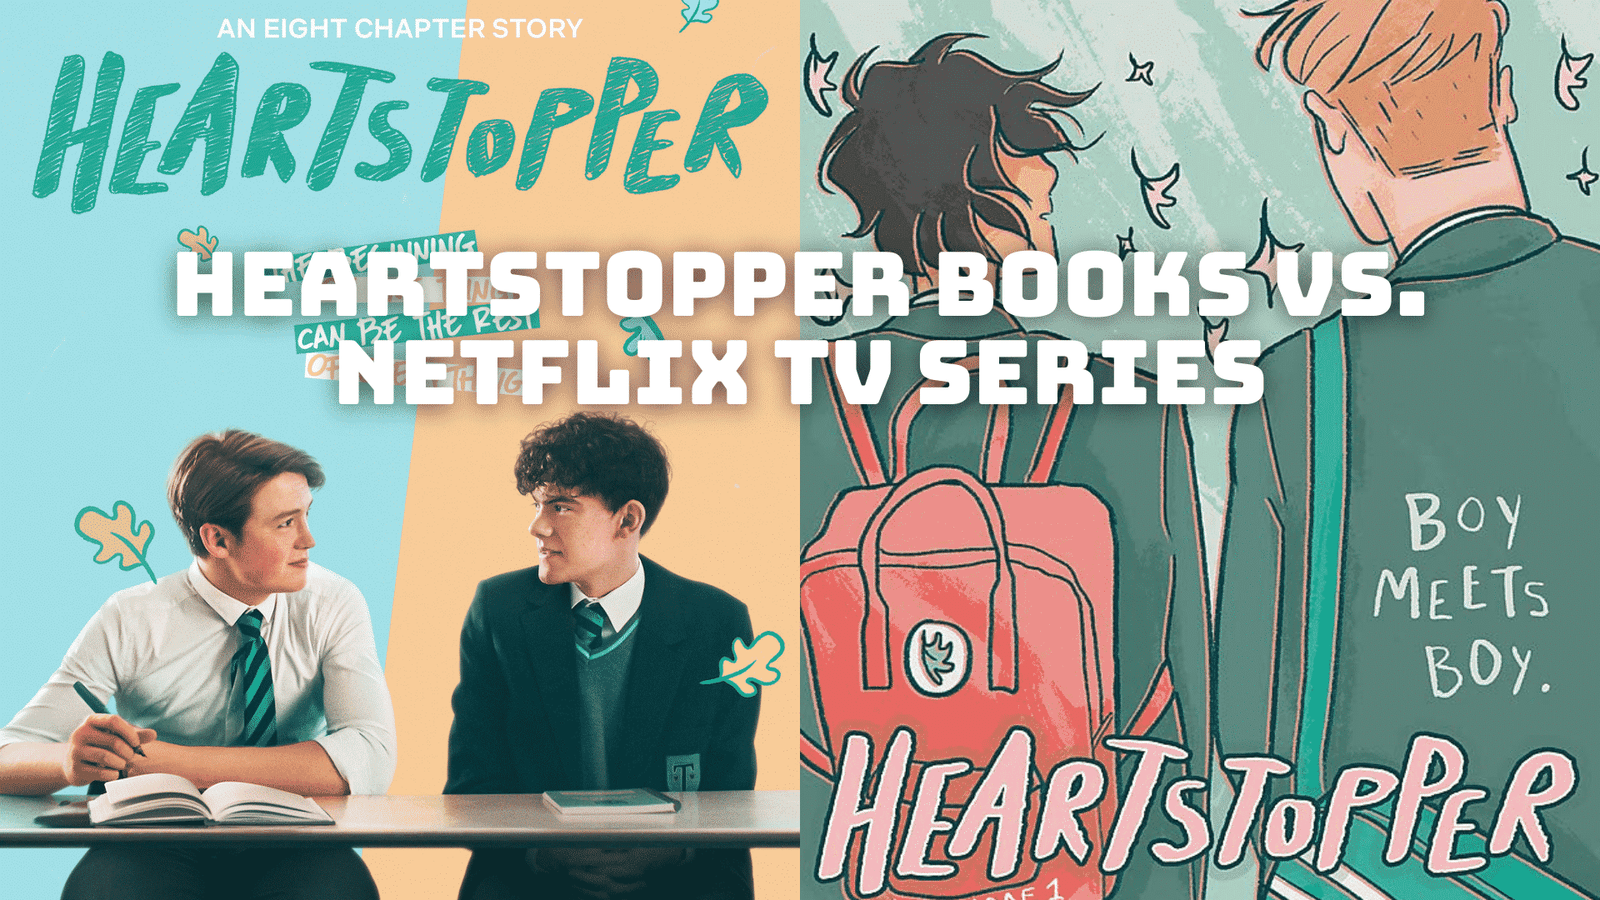 Heartstopper Books vs. Netflix TV Series: What are the Differences?